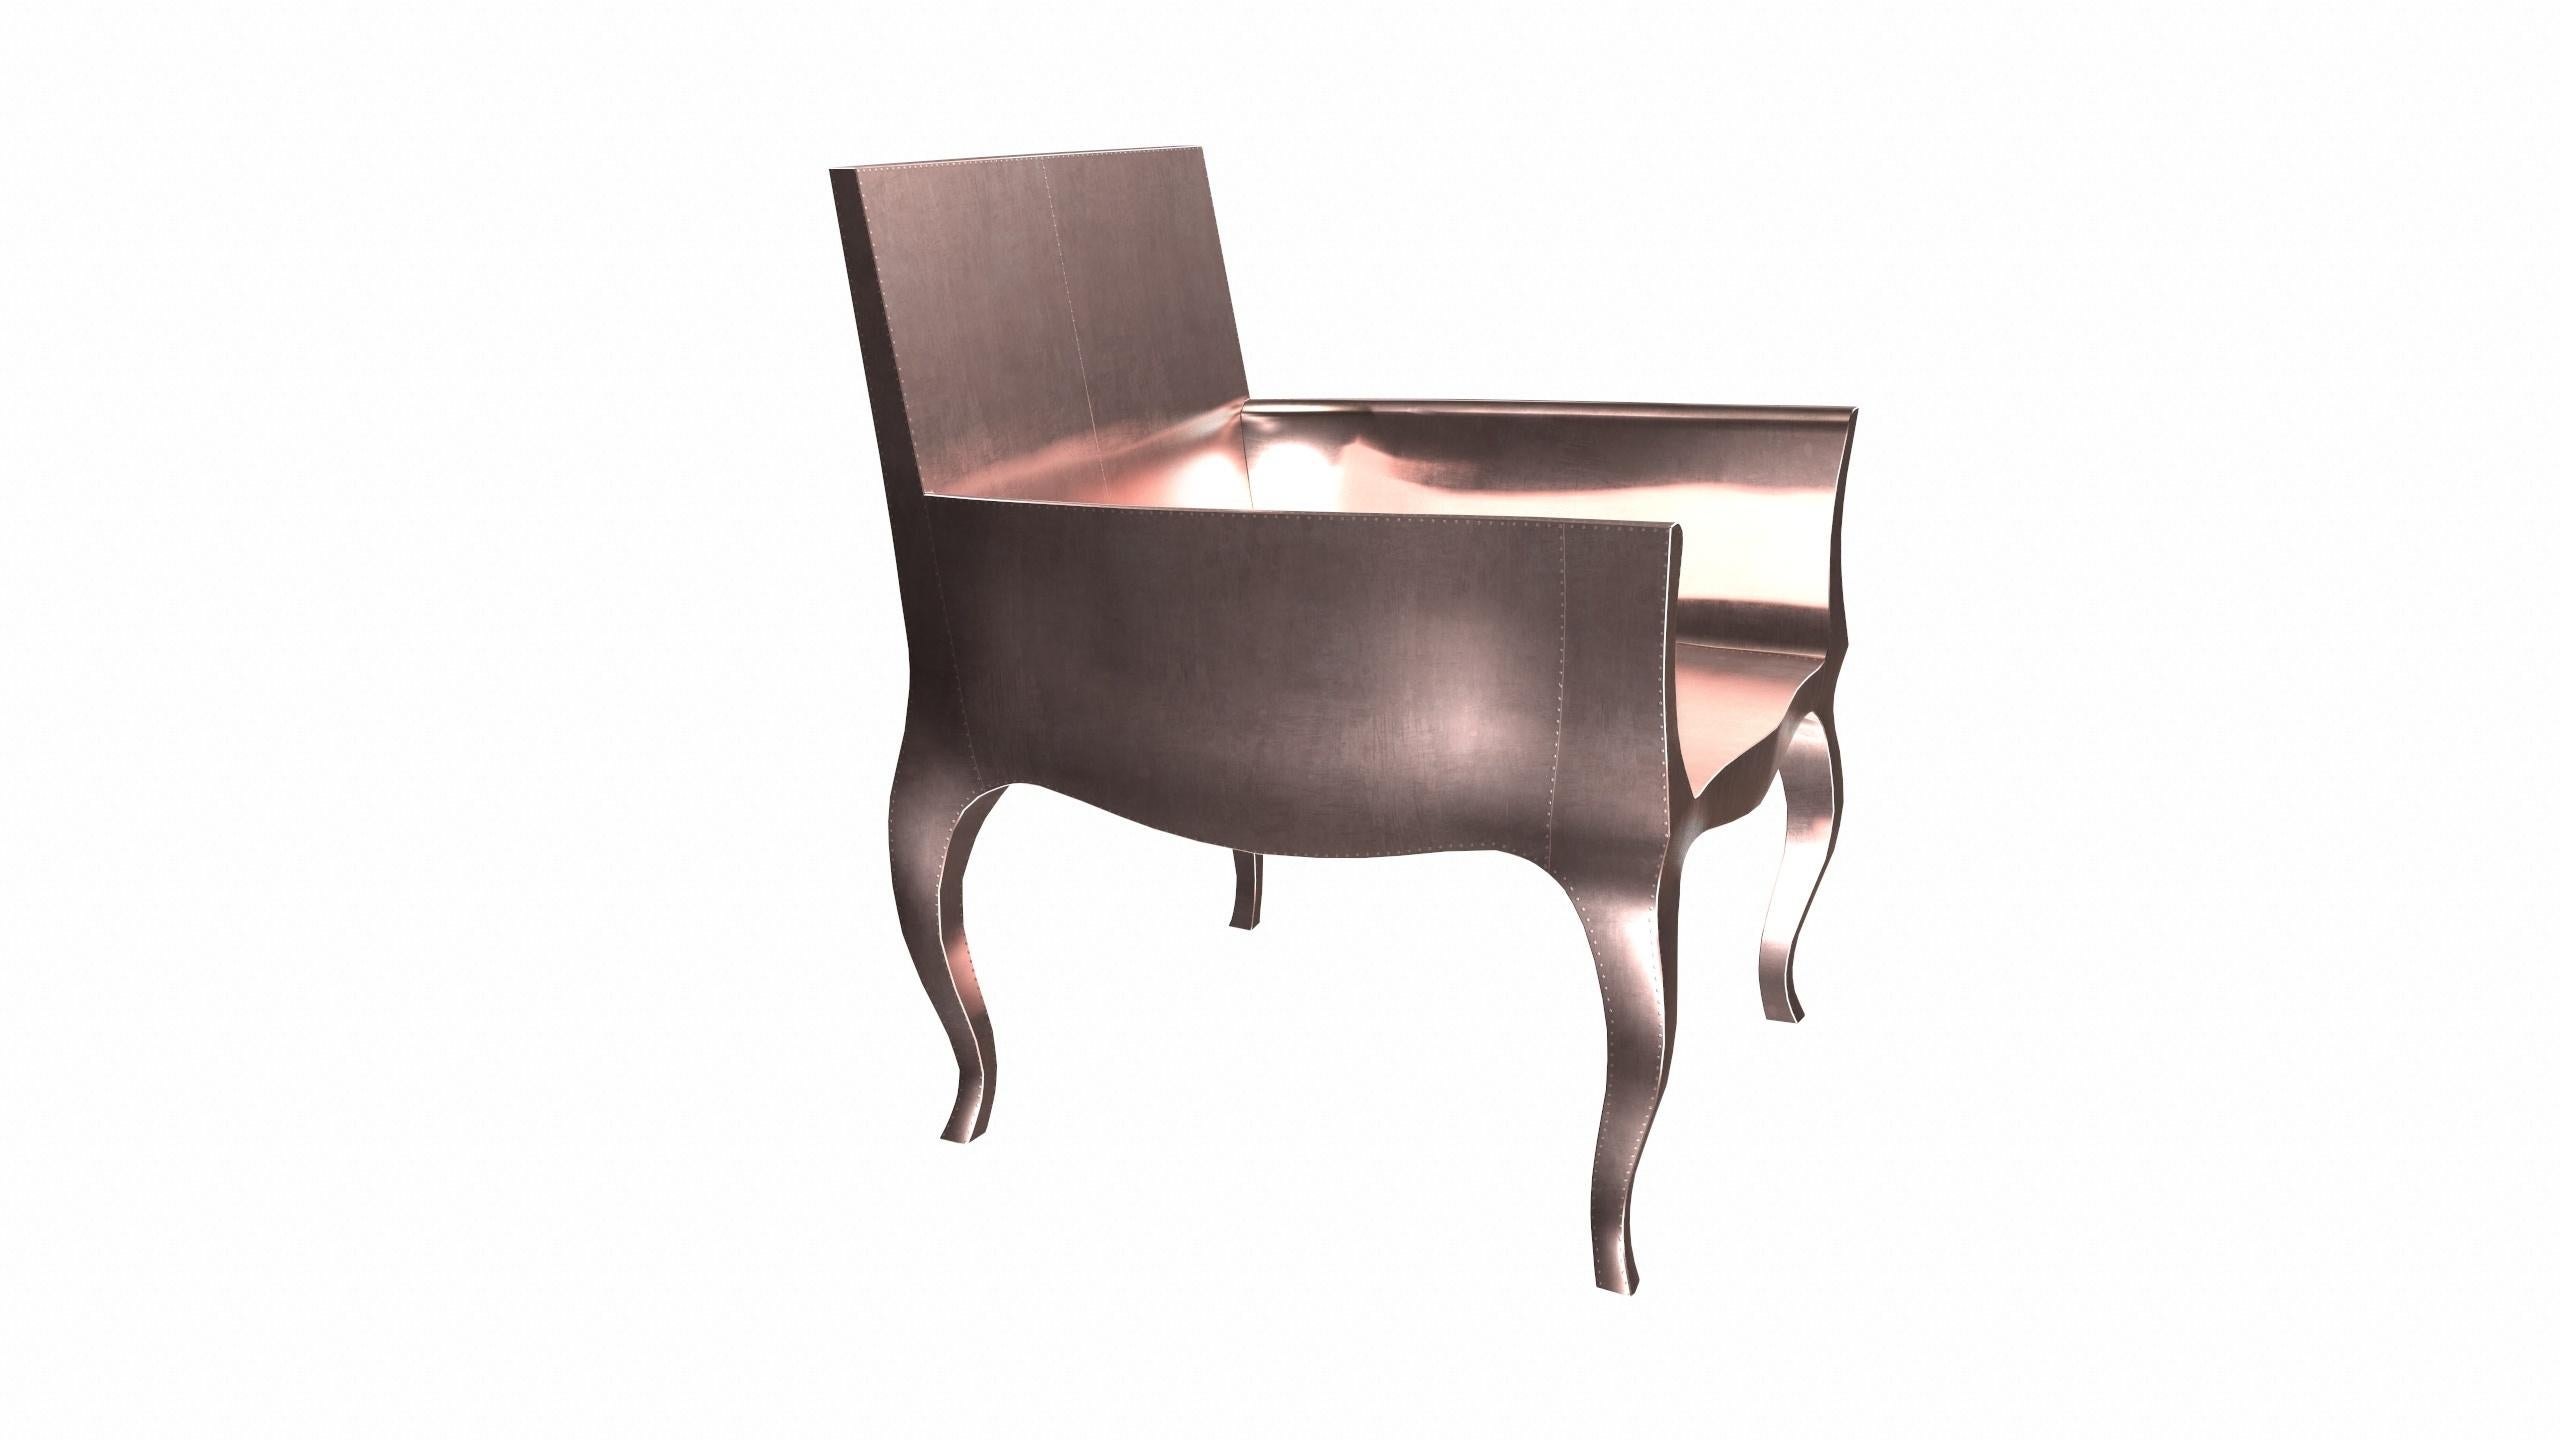 Hand-Carved Art Deco Lounge Chair in Smooth Copper by Paul Mathieu for S. Odegard For Sale